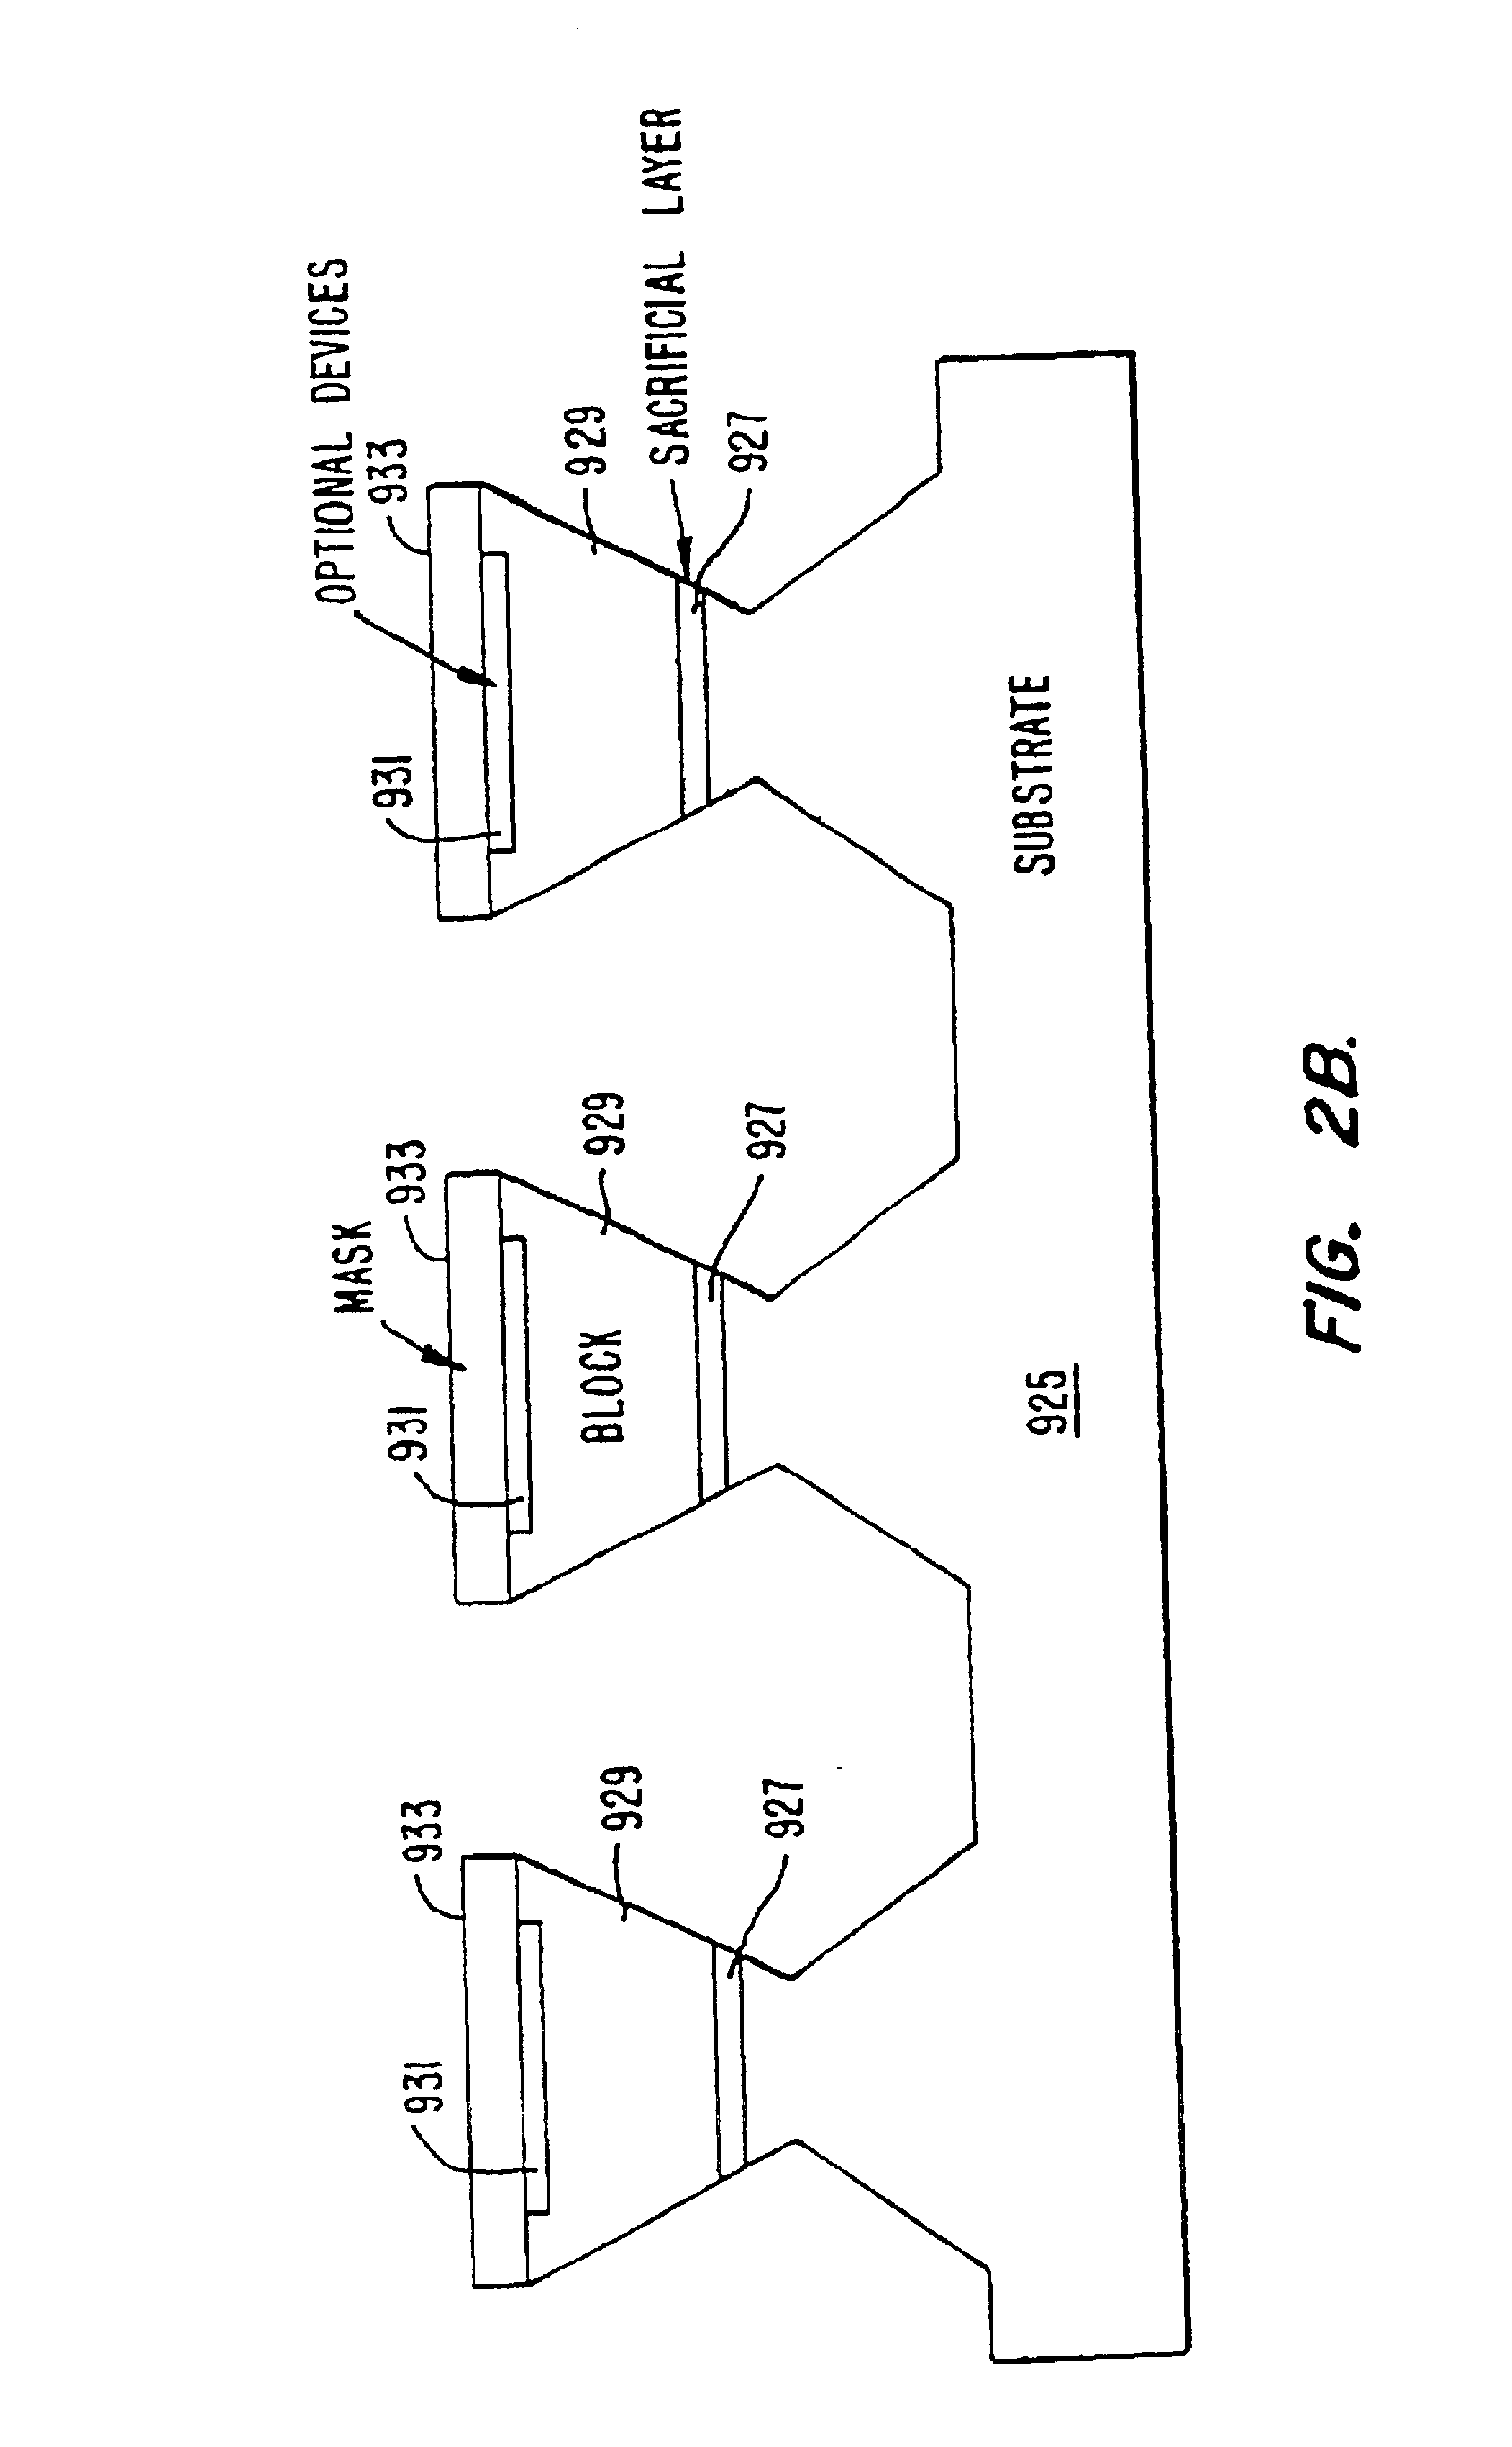 Method and apparatus for fabricating self-assembling microstructures